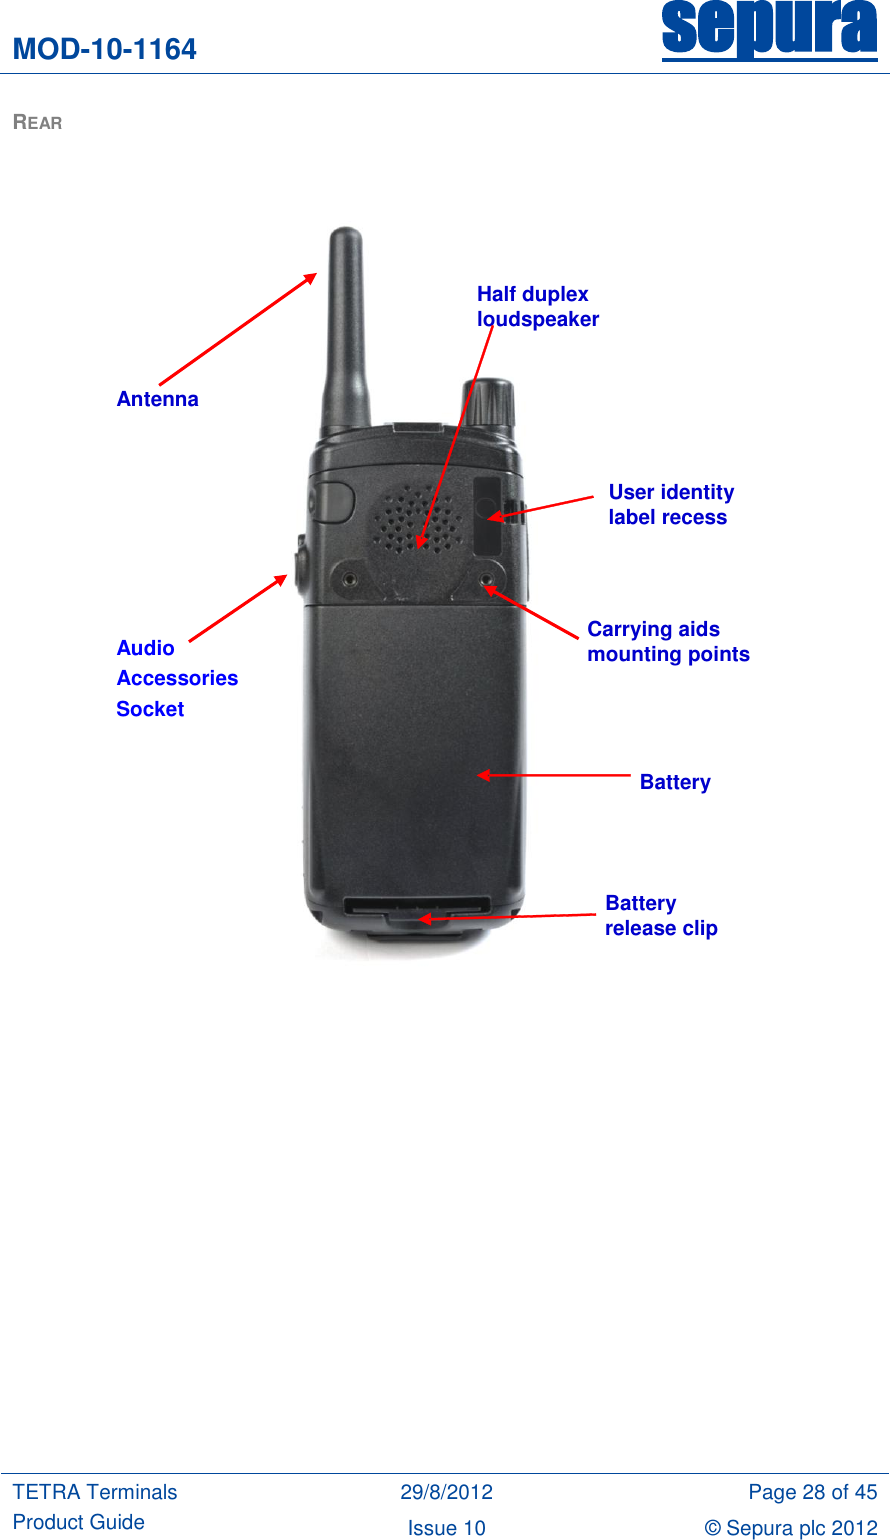 MOD-10-1164 sepura  TETRA Terminals Product Guide 29/8/2012 Page 28 of 45 Issue 10 © Sepura plc 2012   REAR                  Half duplex  loudspeaker Antenna   User identity  label recess Carrying aids  mounting points Battery Battery  release clip Audio Accessories Socket 